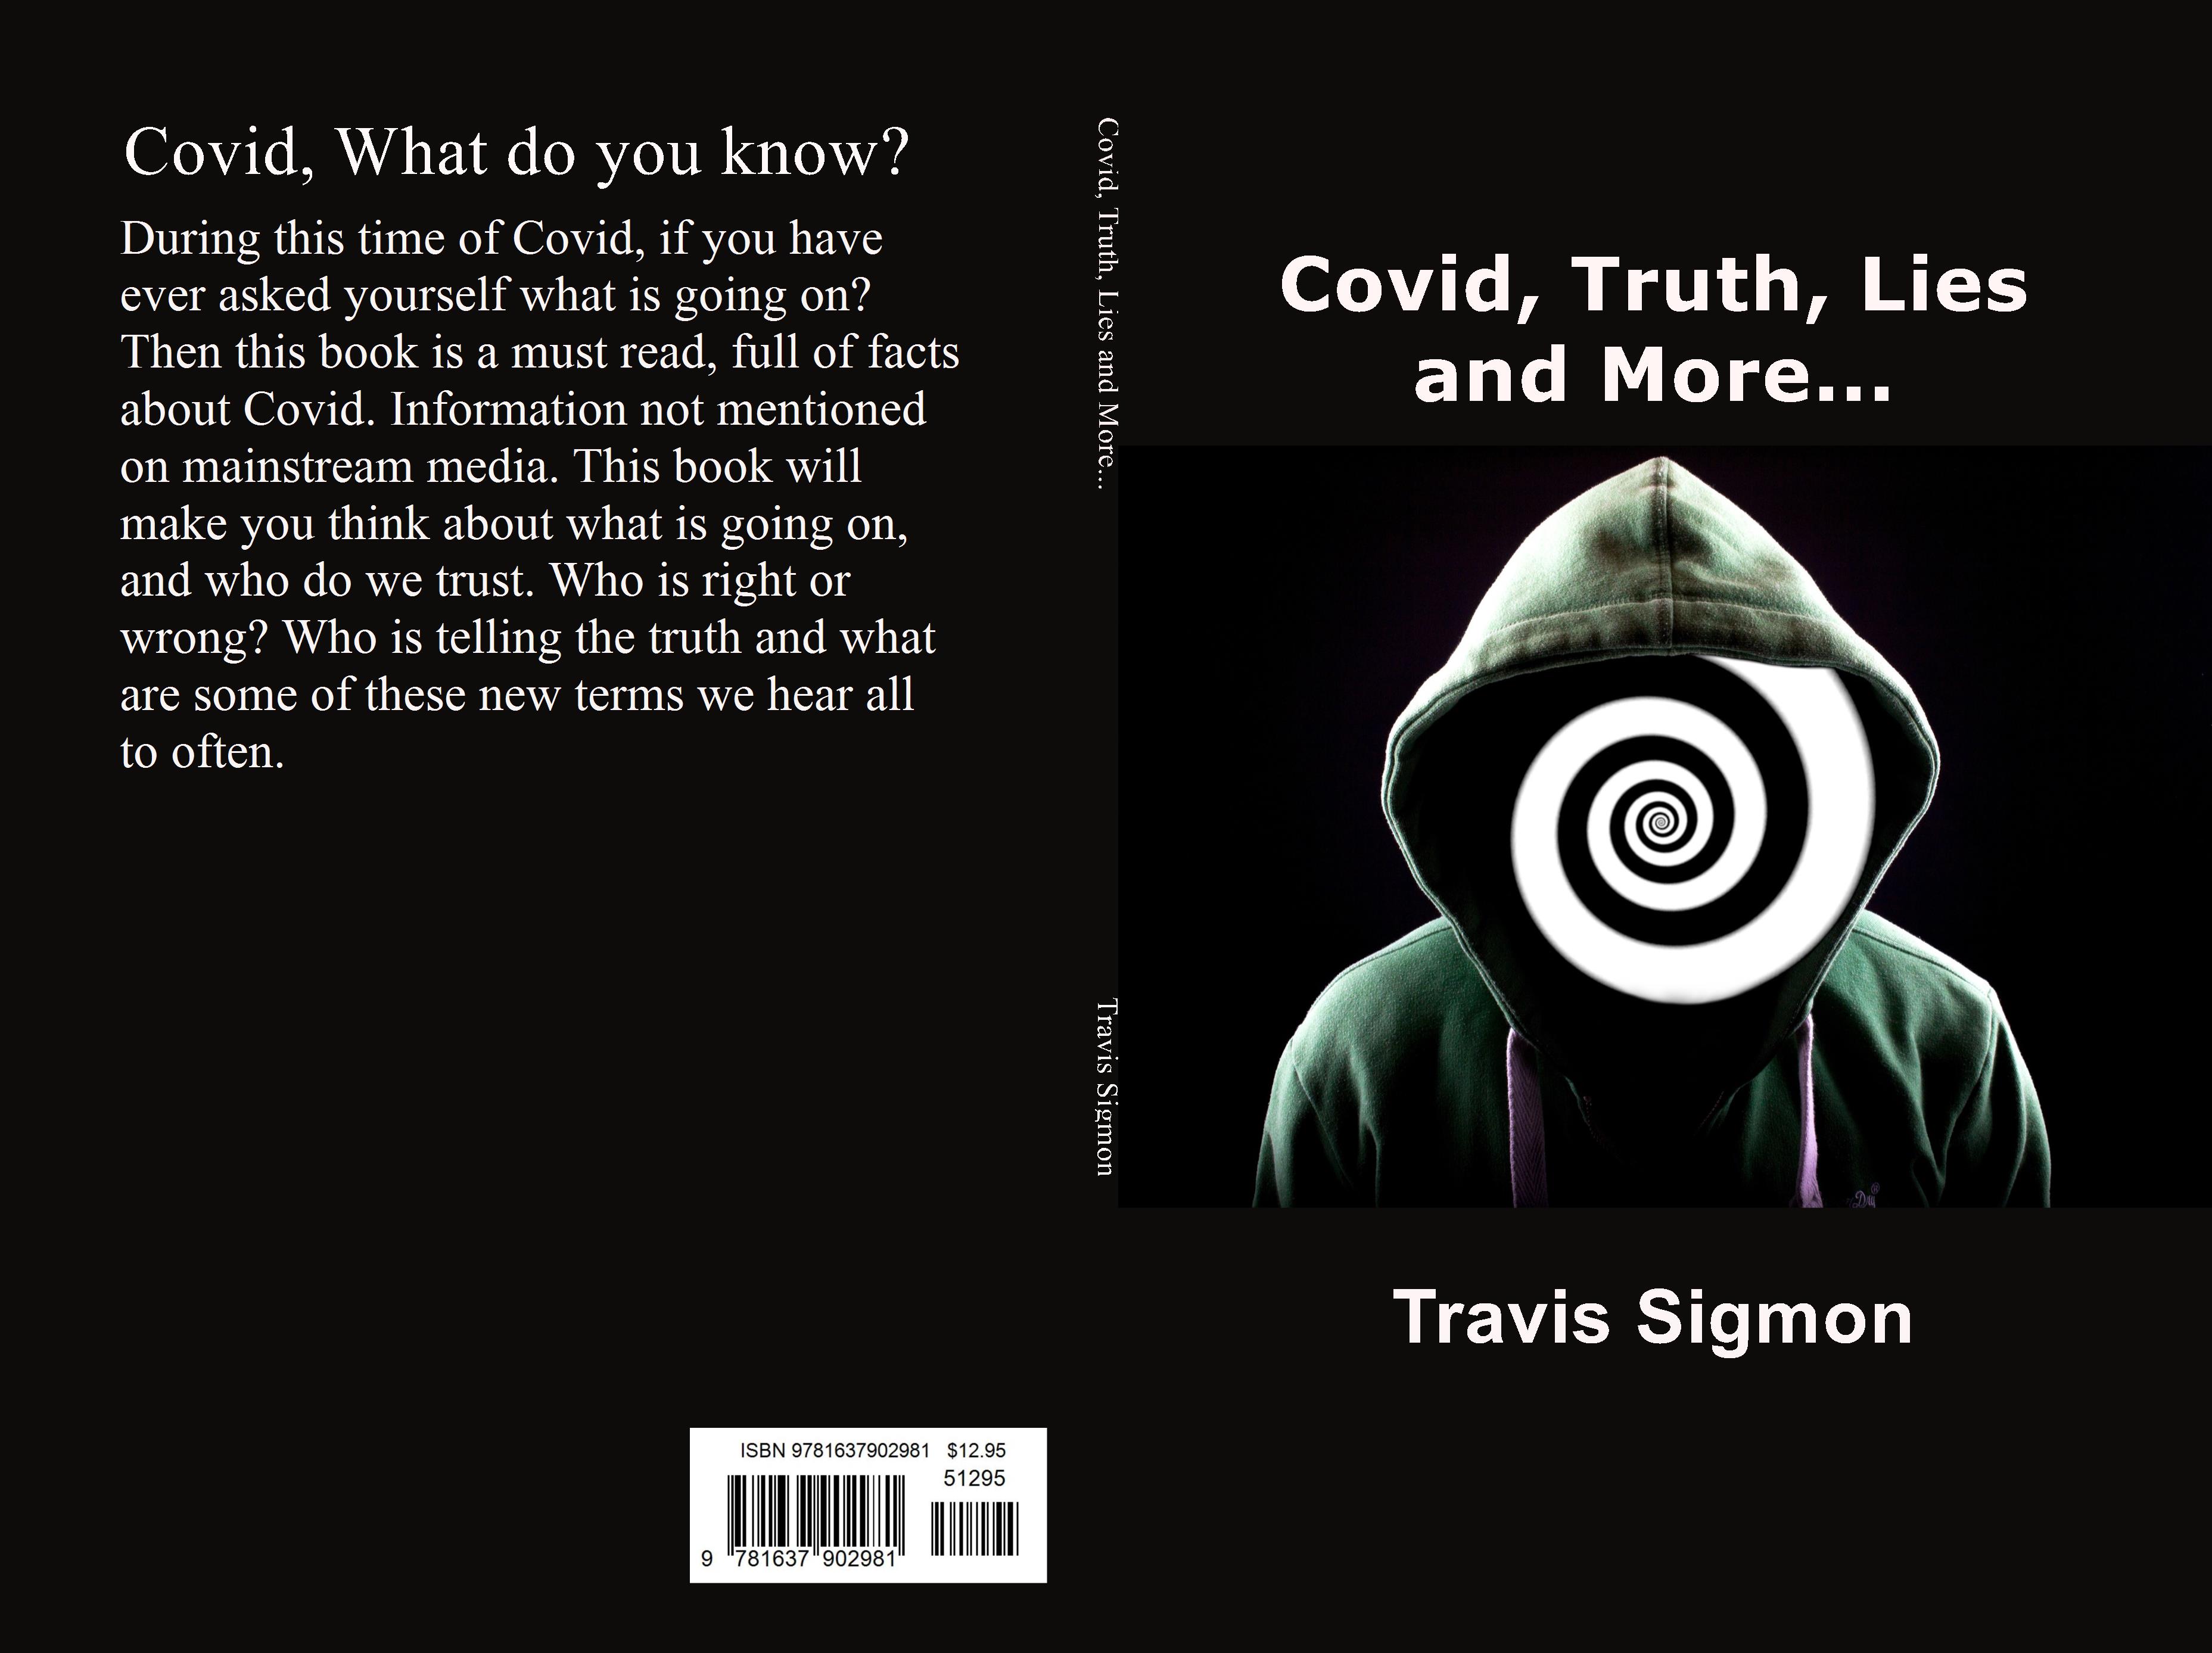 Covid, Truth, Lies and More... cover image